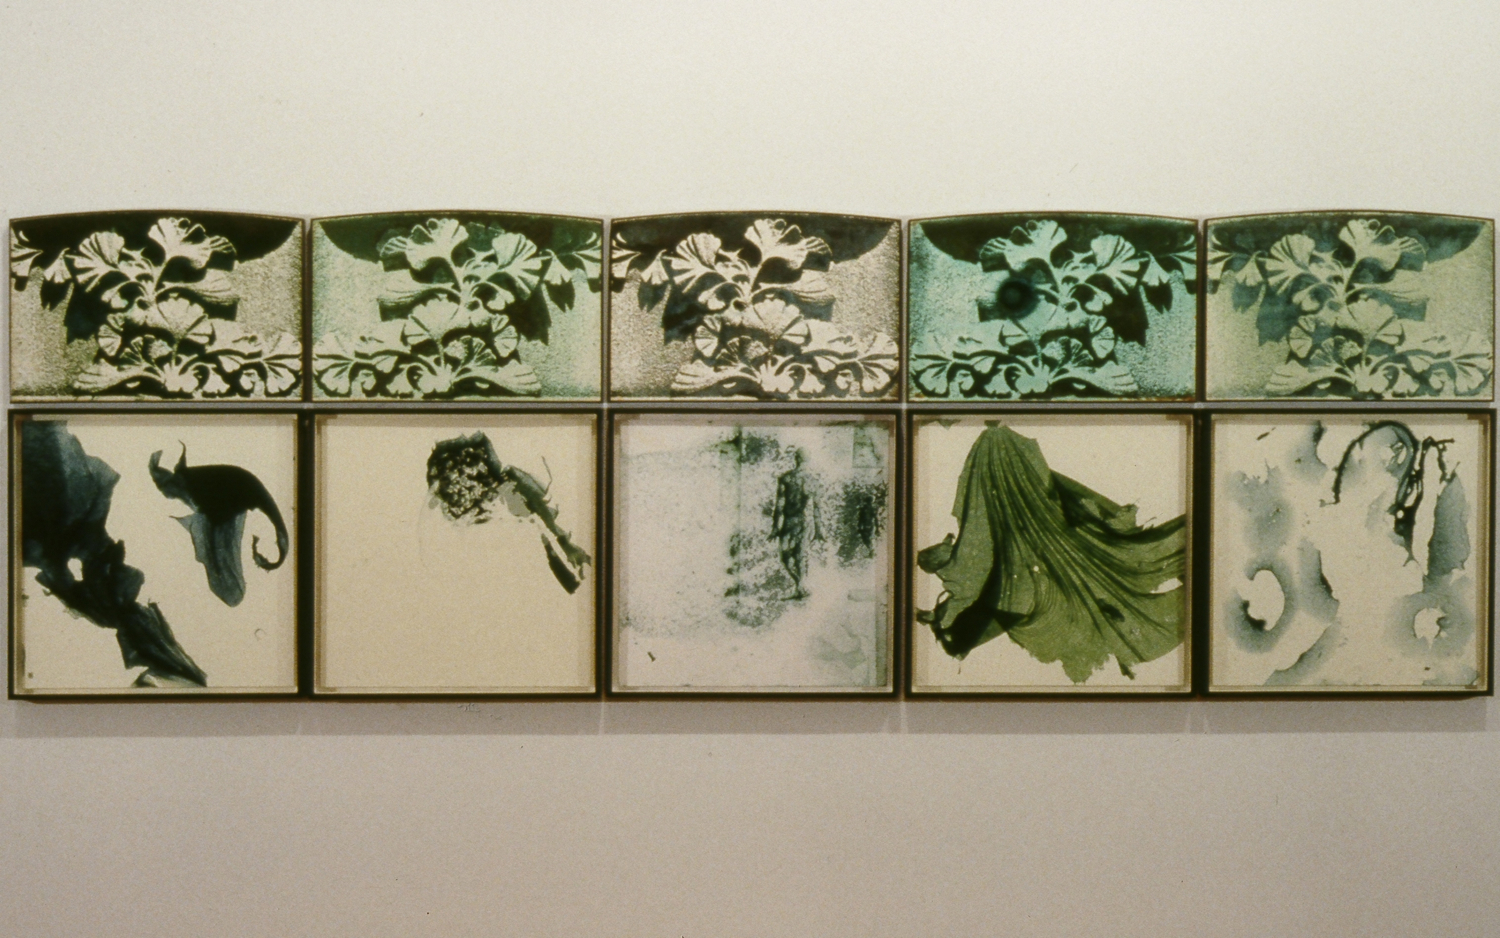 The Exquisite Genetic Vale Meets Tradition in Sculpture, 1992, 90"x30"x2", iron and bronze powder on plaster, Cyanobacteria on board        